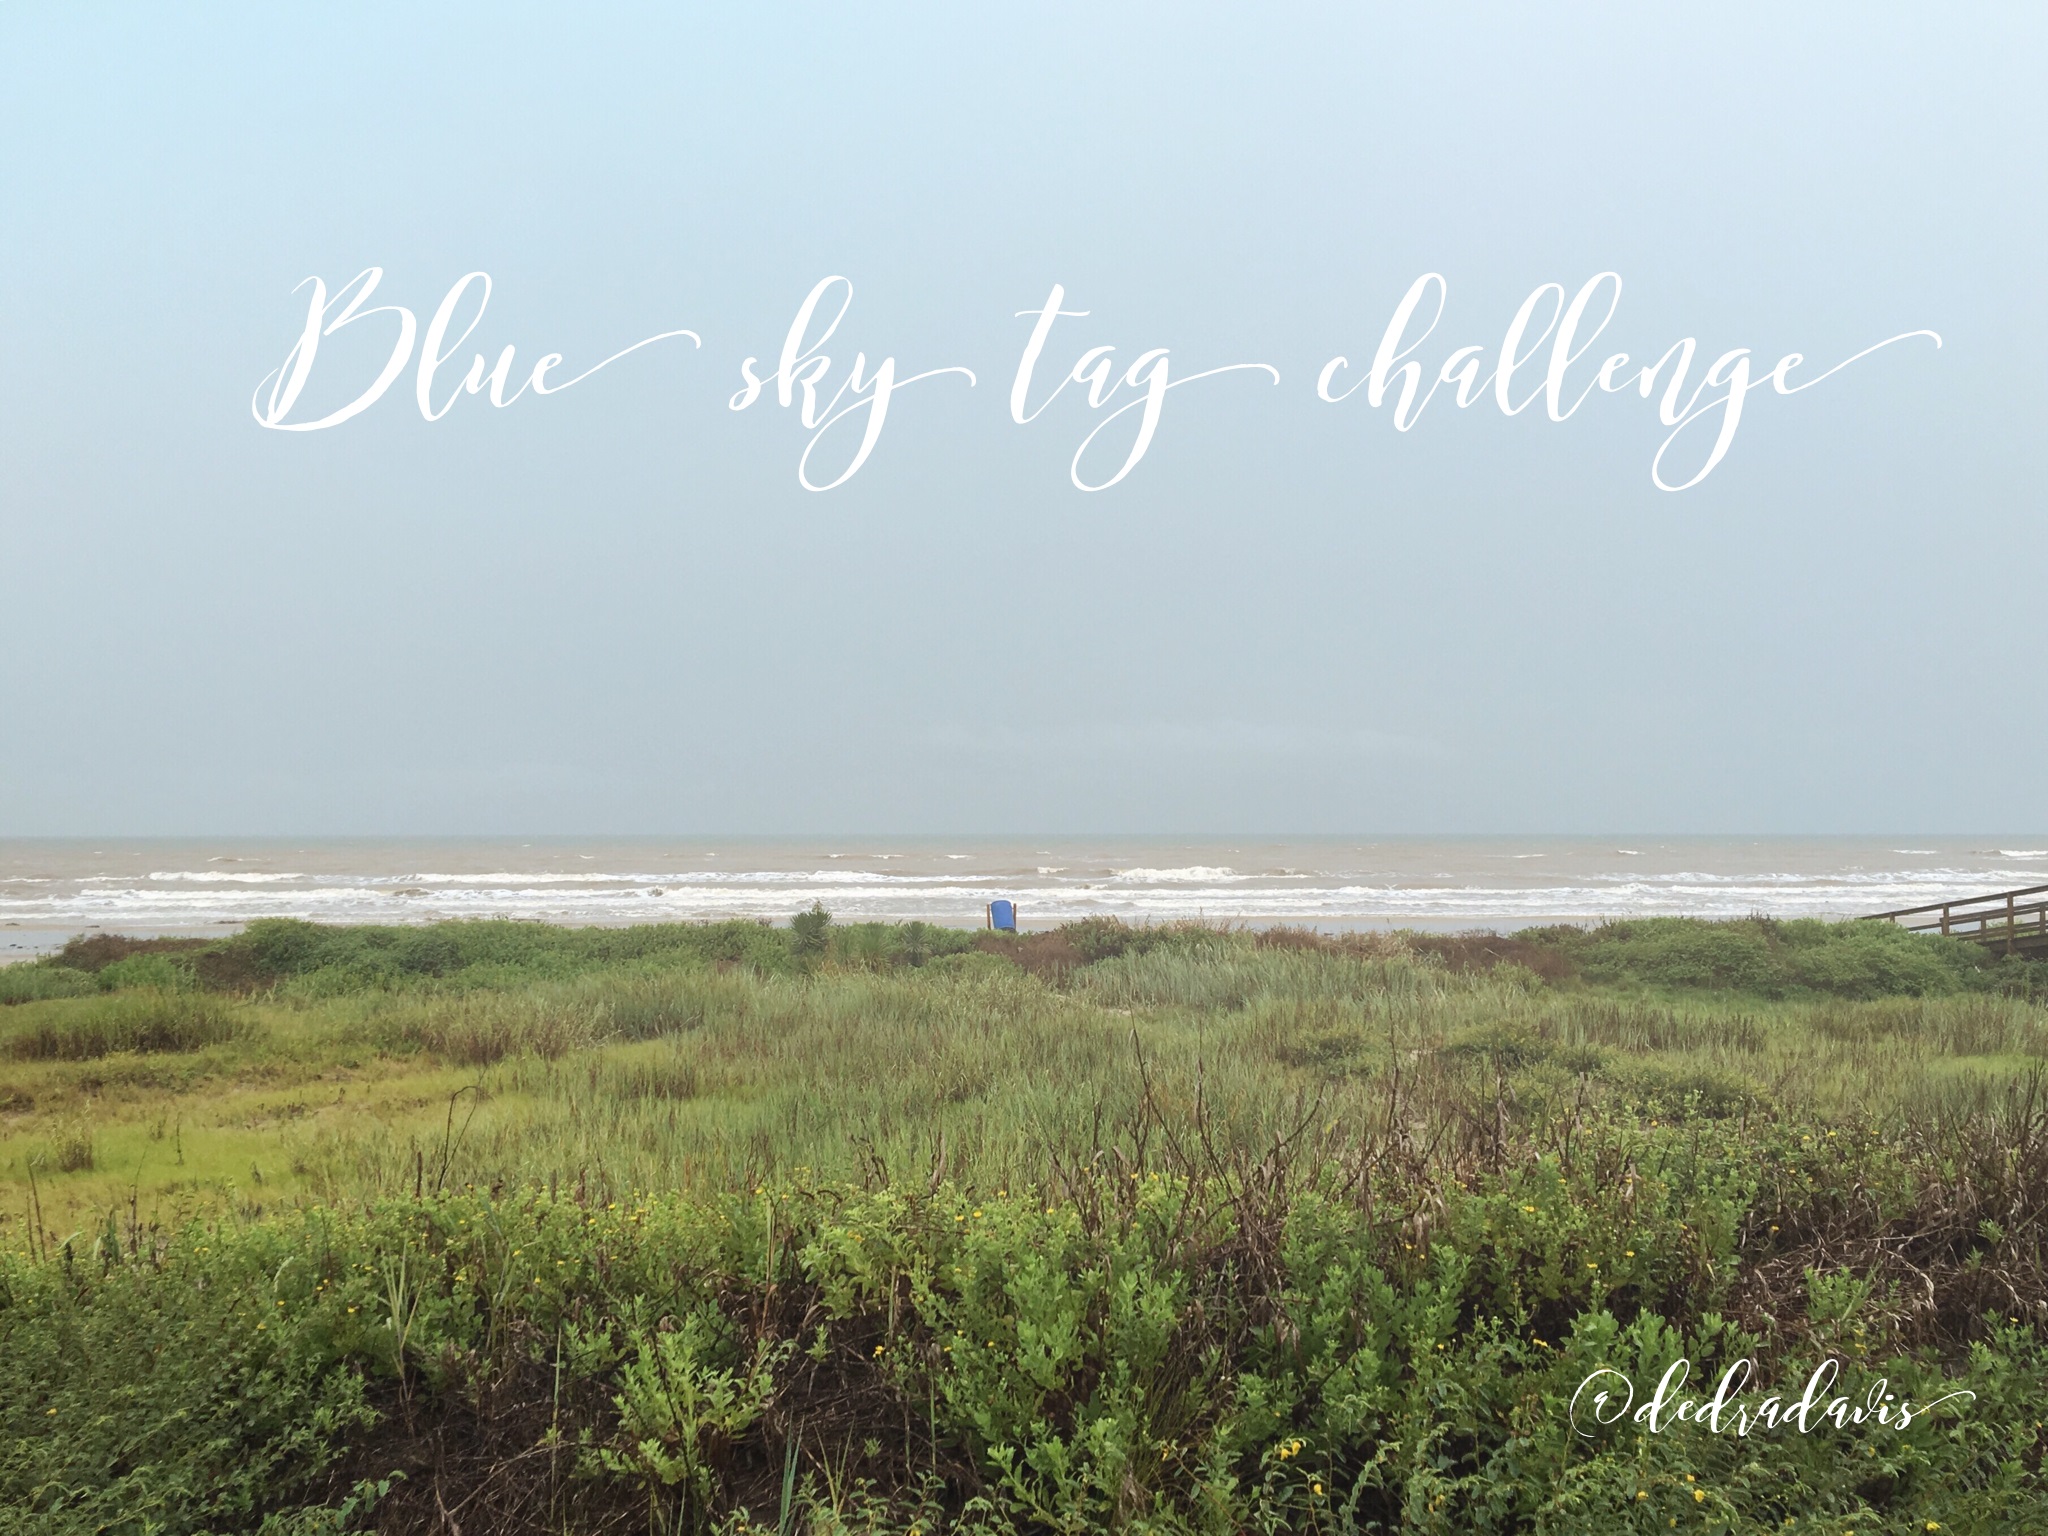 Getting to know me-questions and answers for the Blue Sky Tag Challenge